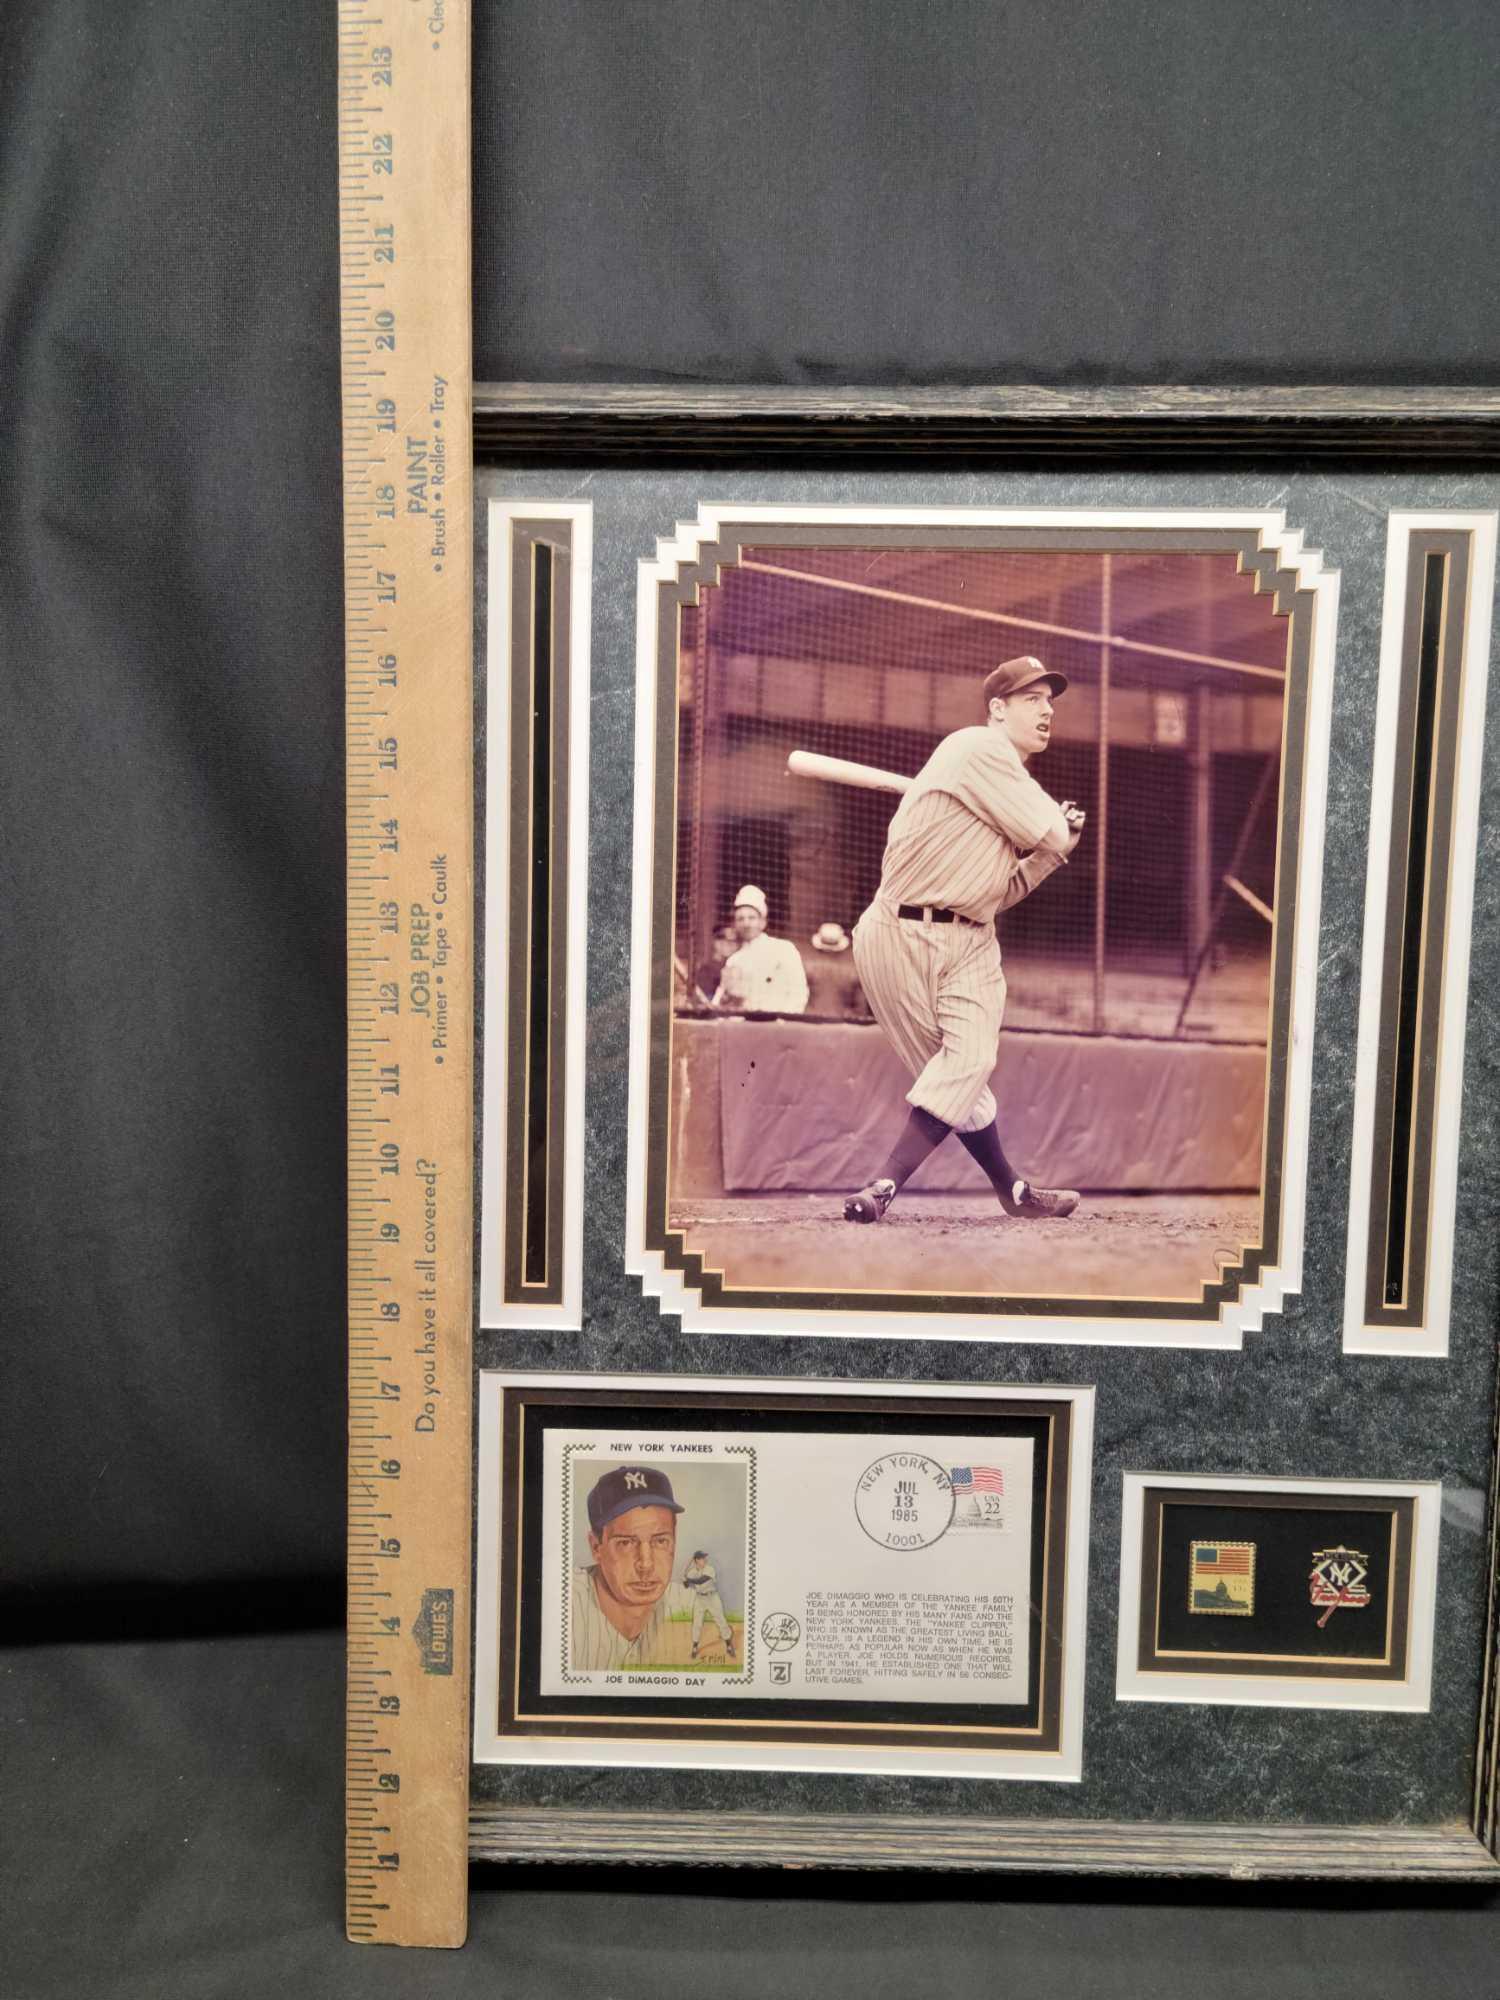 New York Yankees Joe DiMaggio Framed photo pins and stamped card